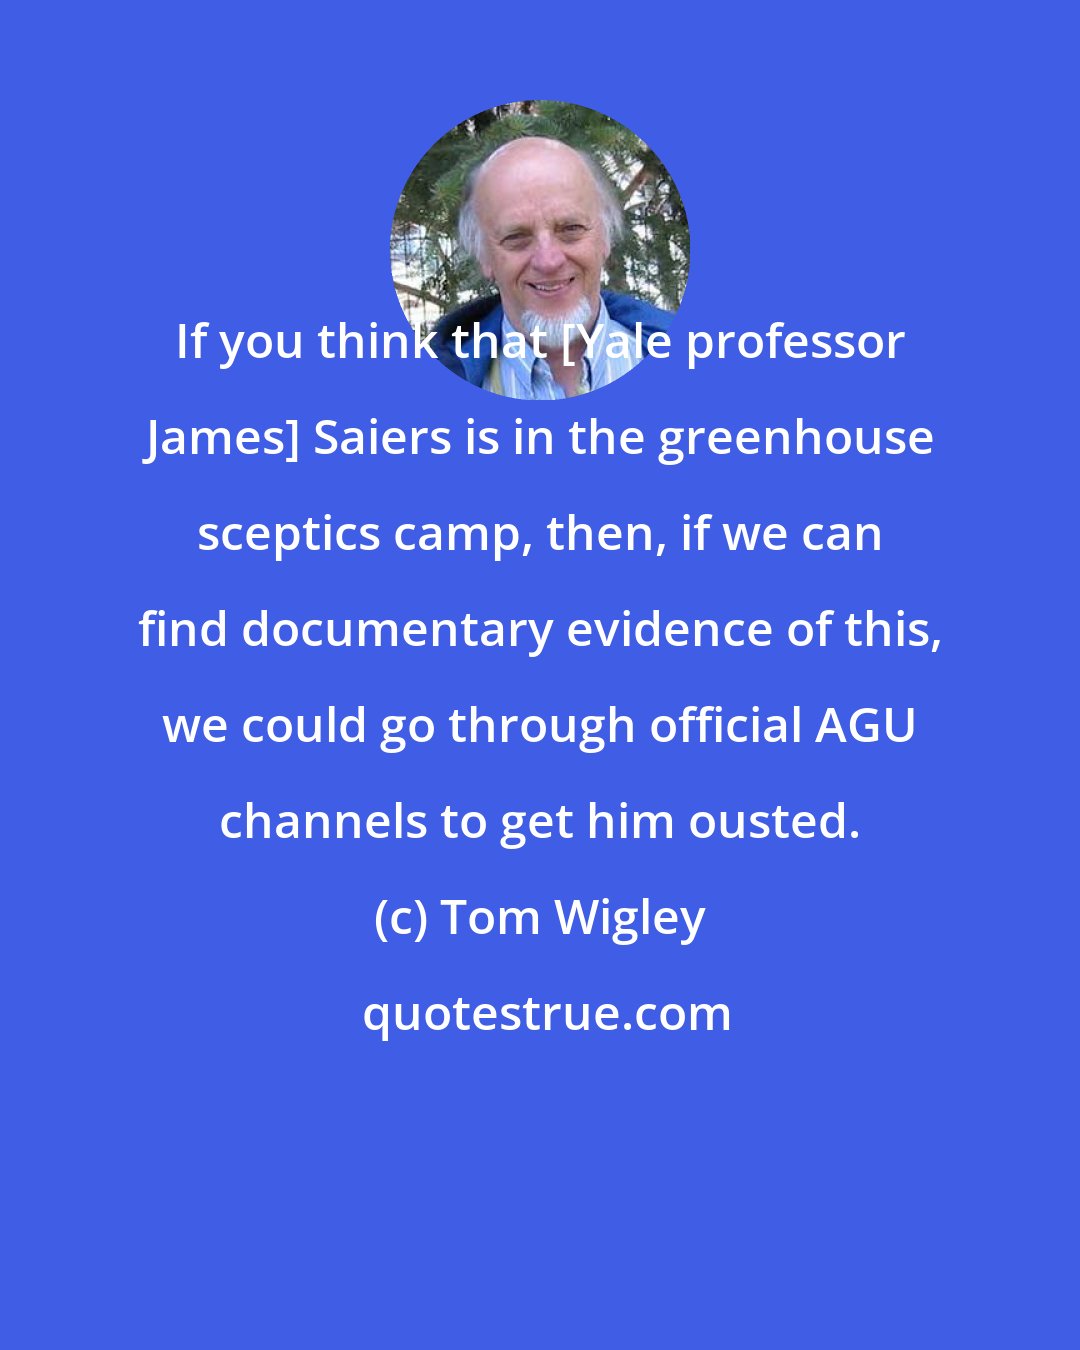 Tom Wigley: If you think that [Yale professor James] Saiers is in the greenhouse sceptics camp, then, if we can find documentary evidence of this, we could go through official AGU channels to get him ousted.